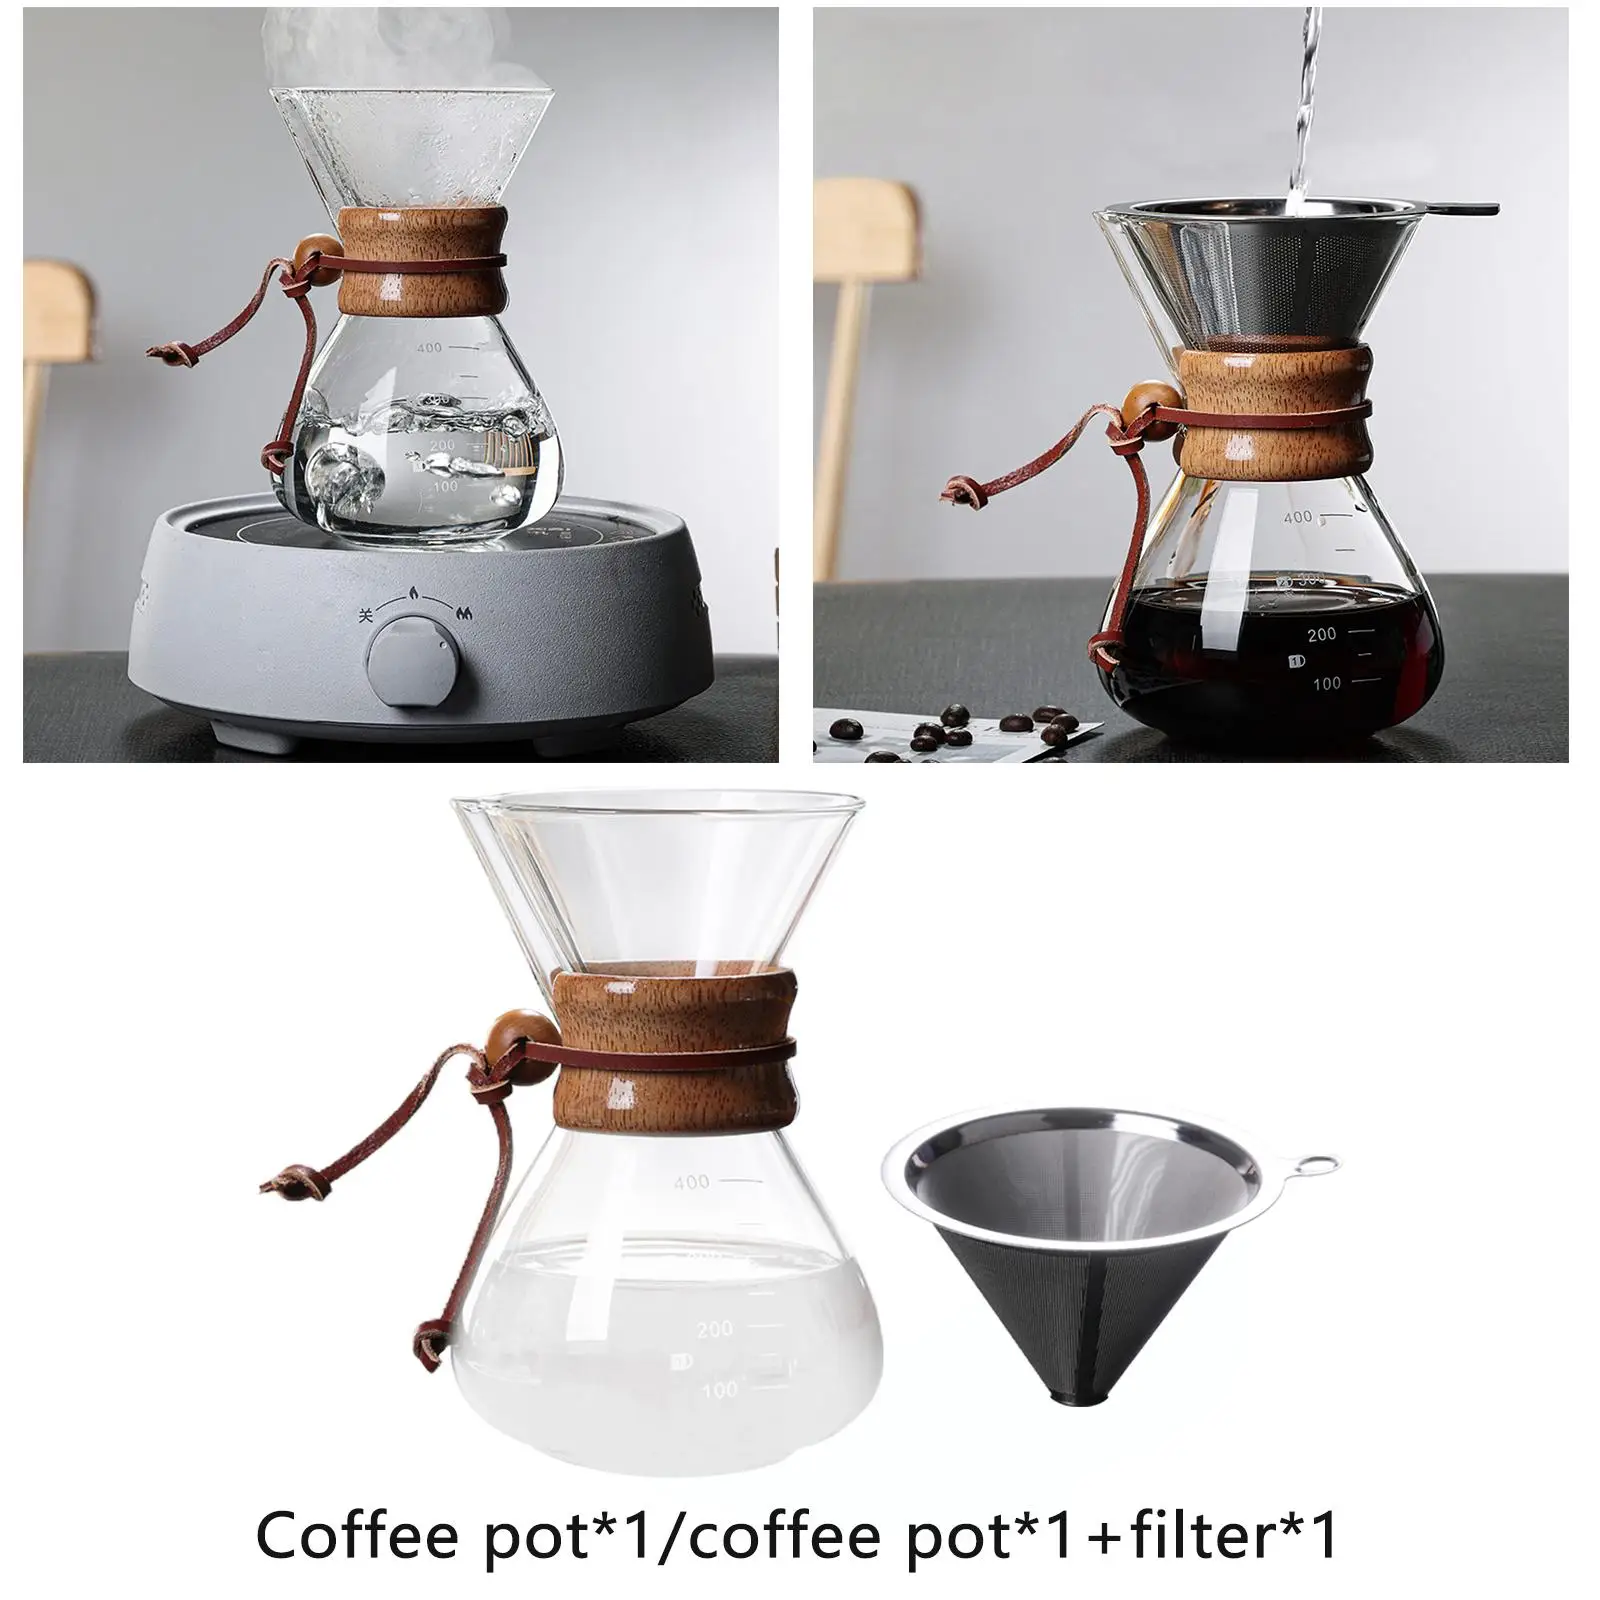 14 oz Pour Over Coffee Maker with Scale Reusable Filter Glass Carafe Glass Coffee Pot